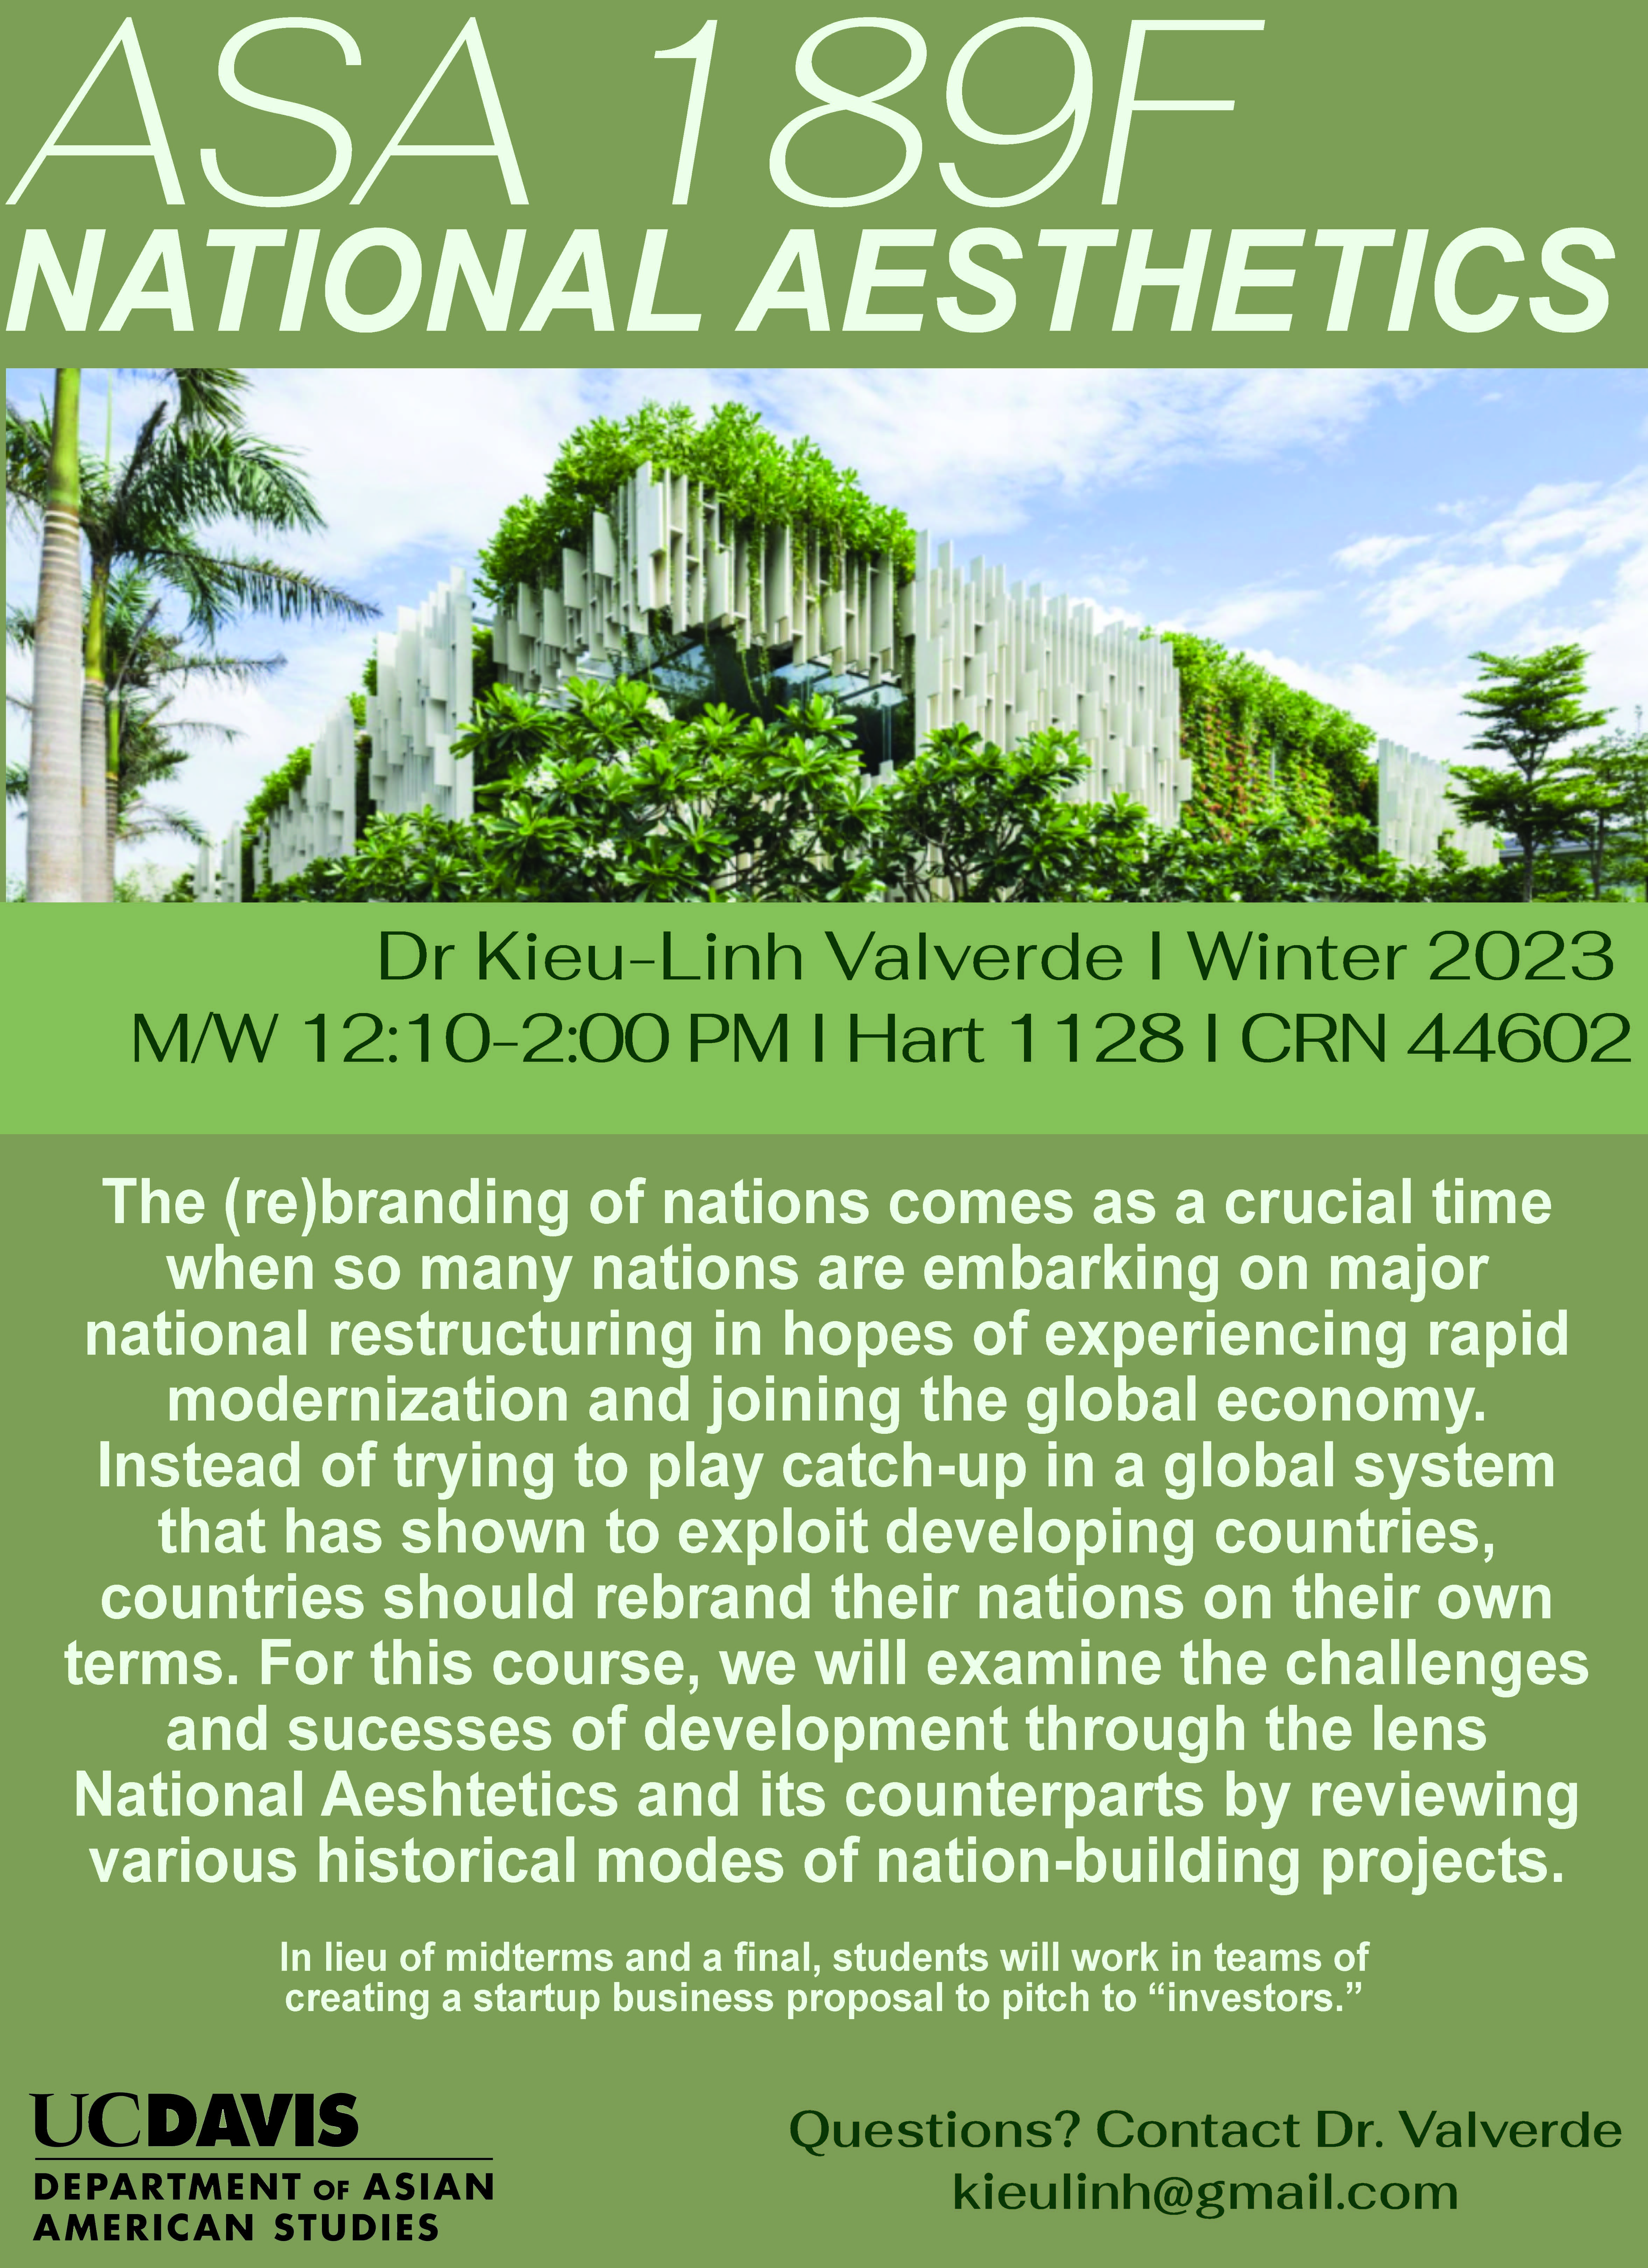 ASA 189F national aesthetic course flyer for Winter 2023